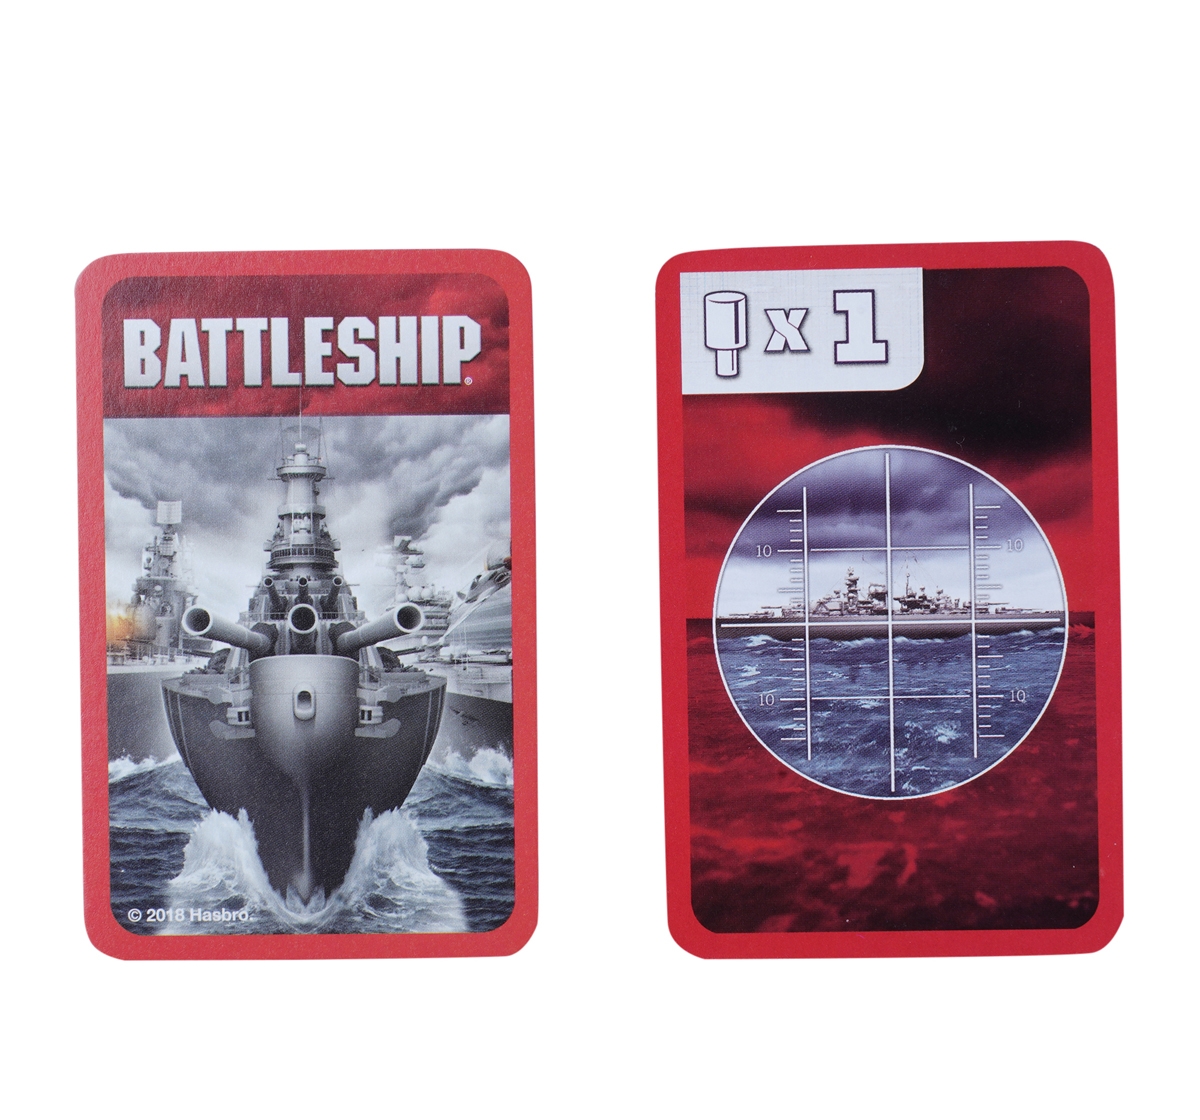 Hasbro Gaming Battleship Classic Card Games for Kids 7Y+, Multicolour